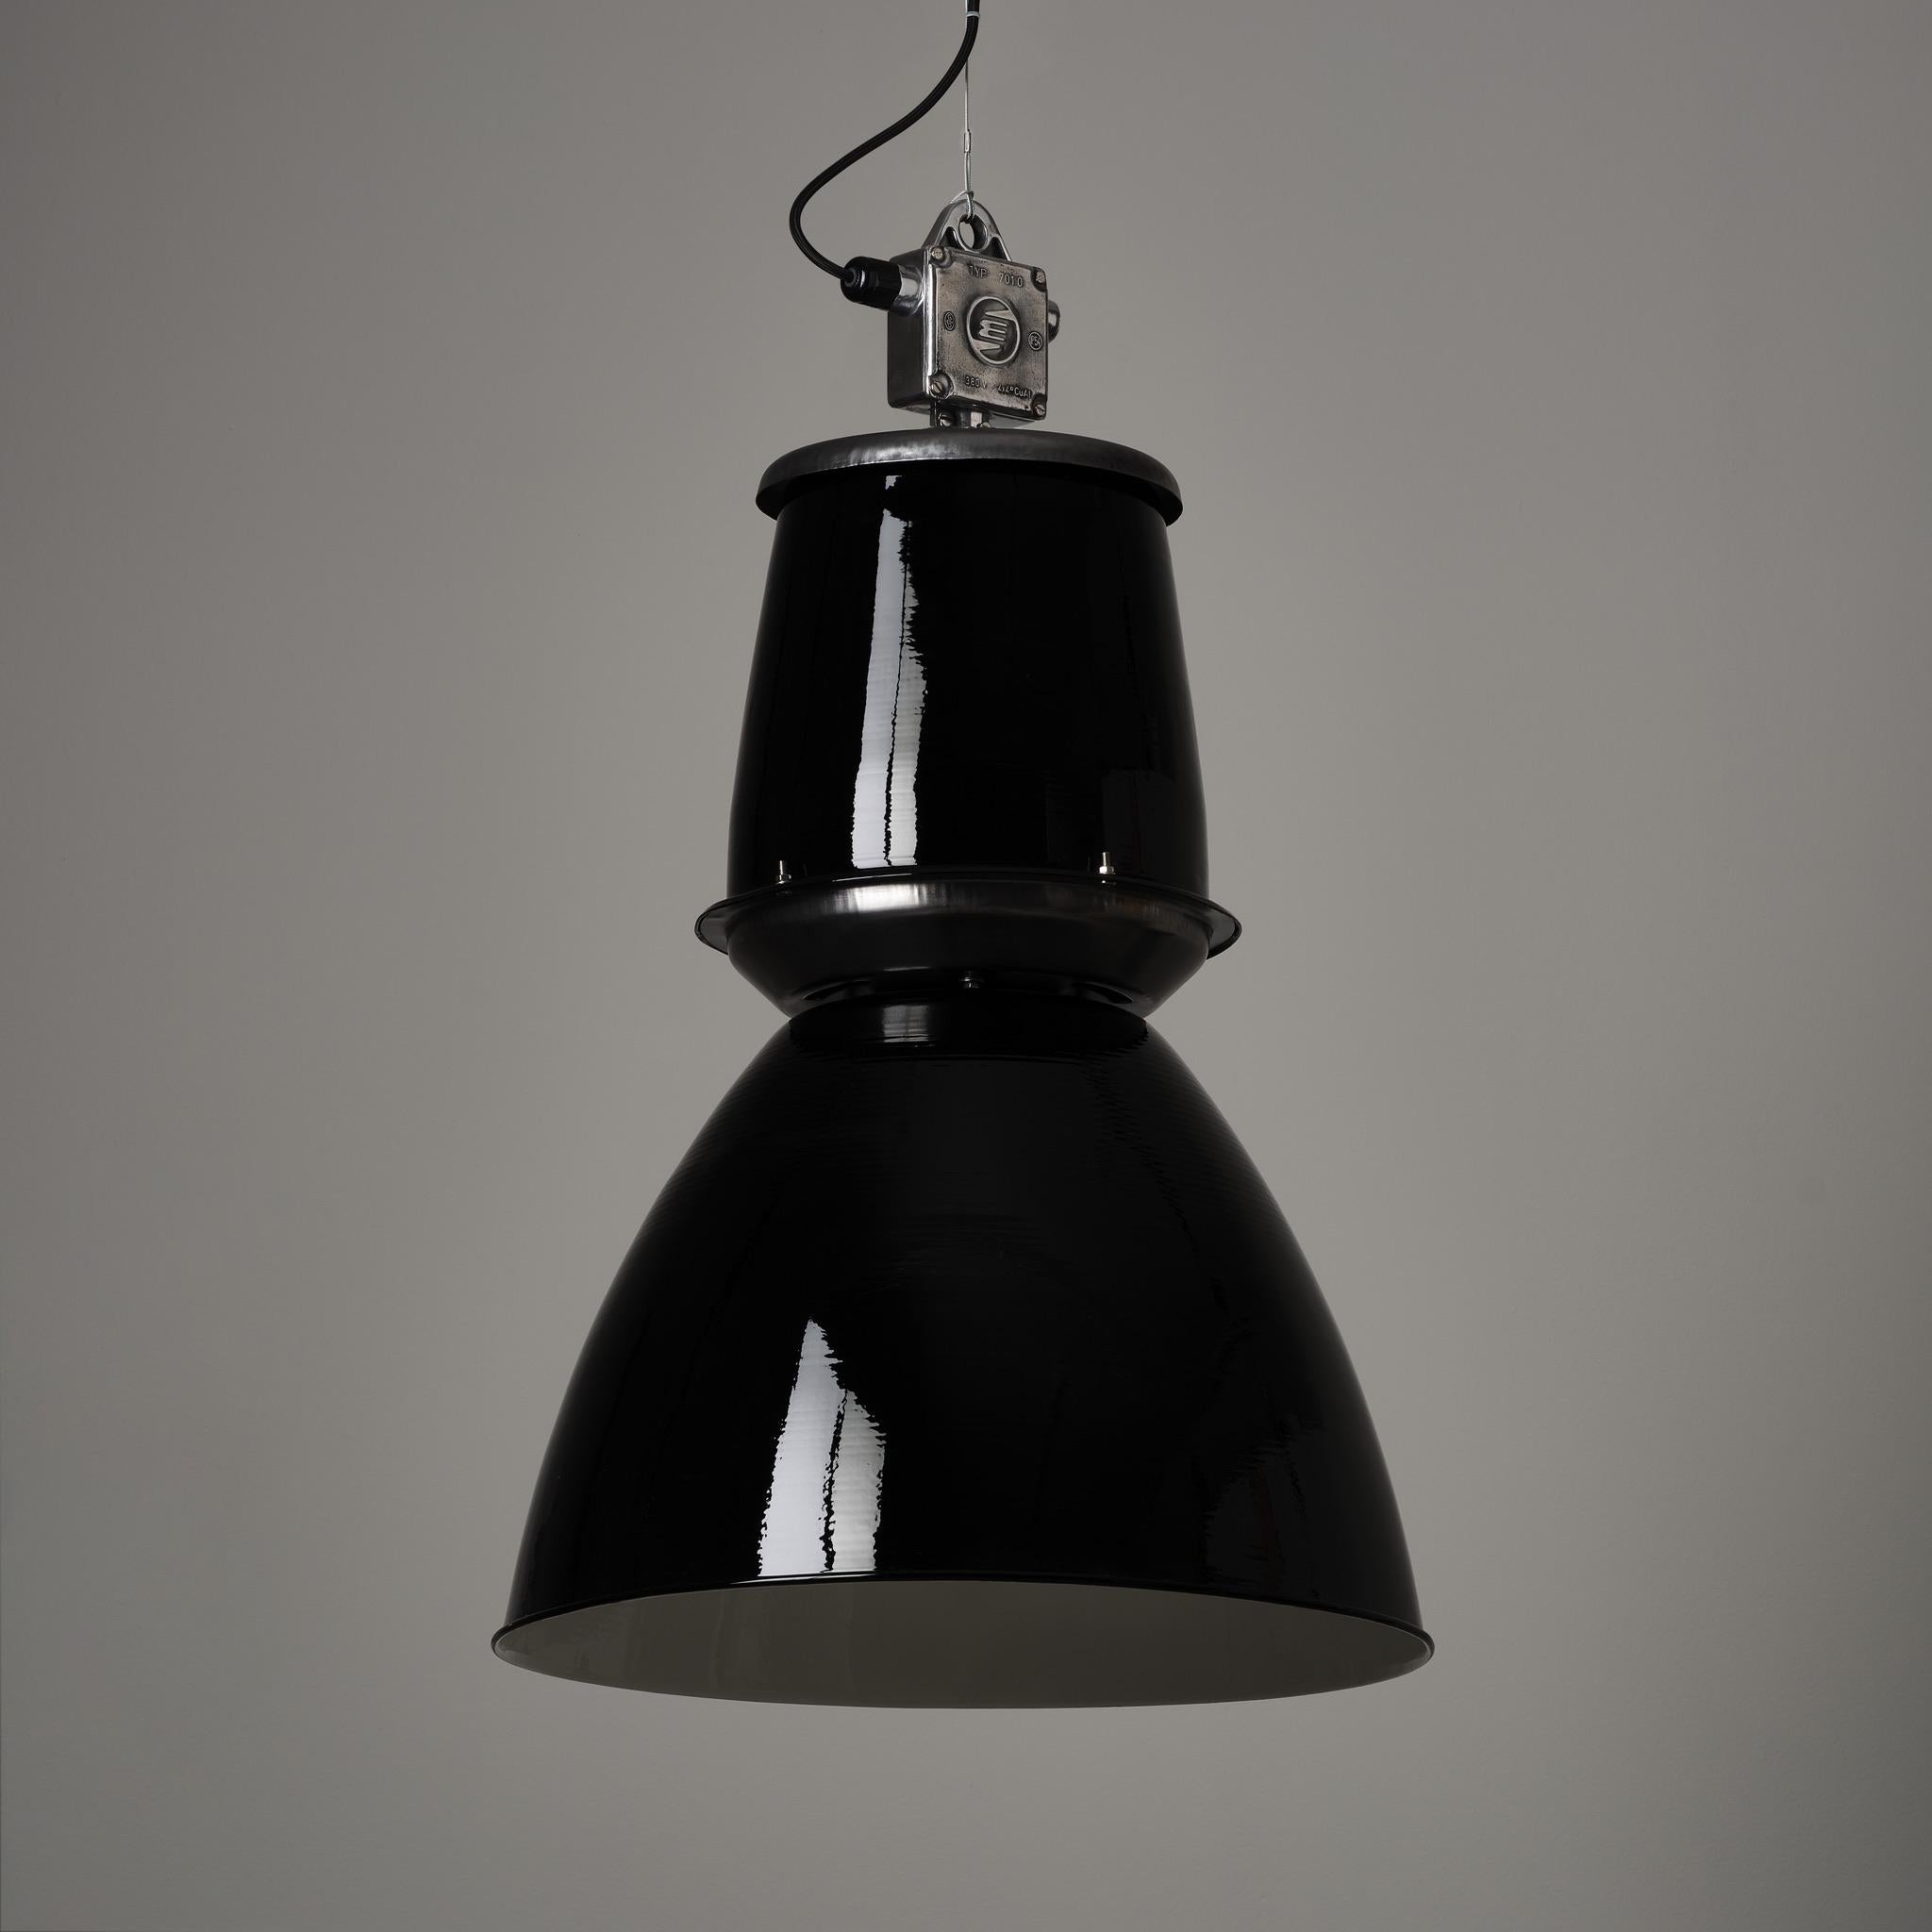 Industrial Vintage Giant Czech Pendant Light - Reconditioned Black/ Grey/ White For Sale